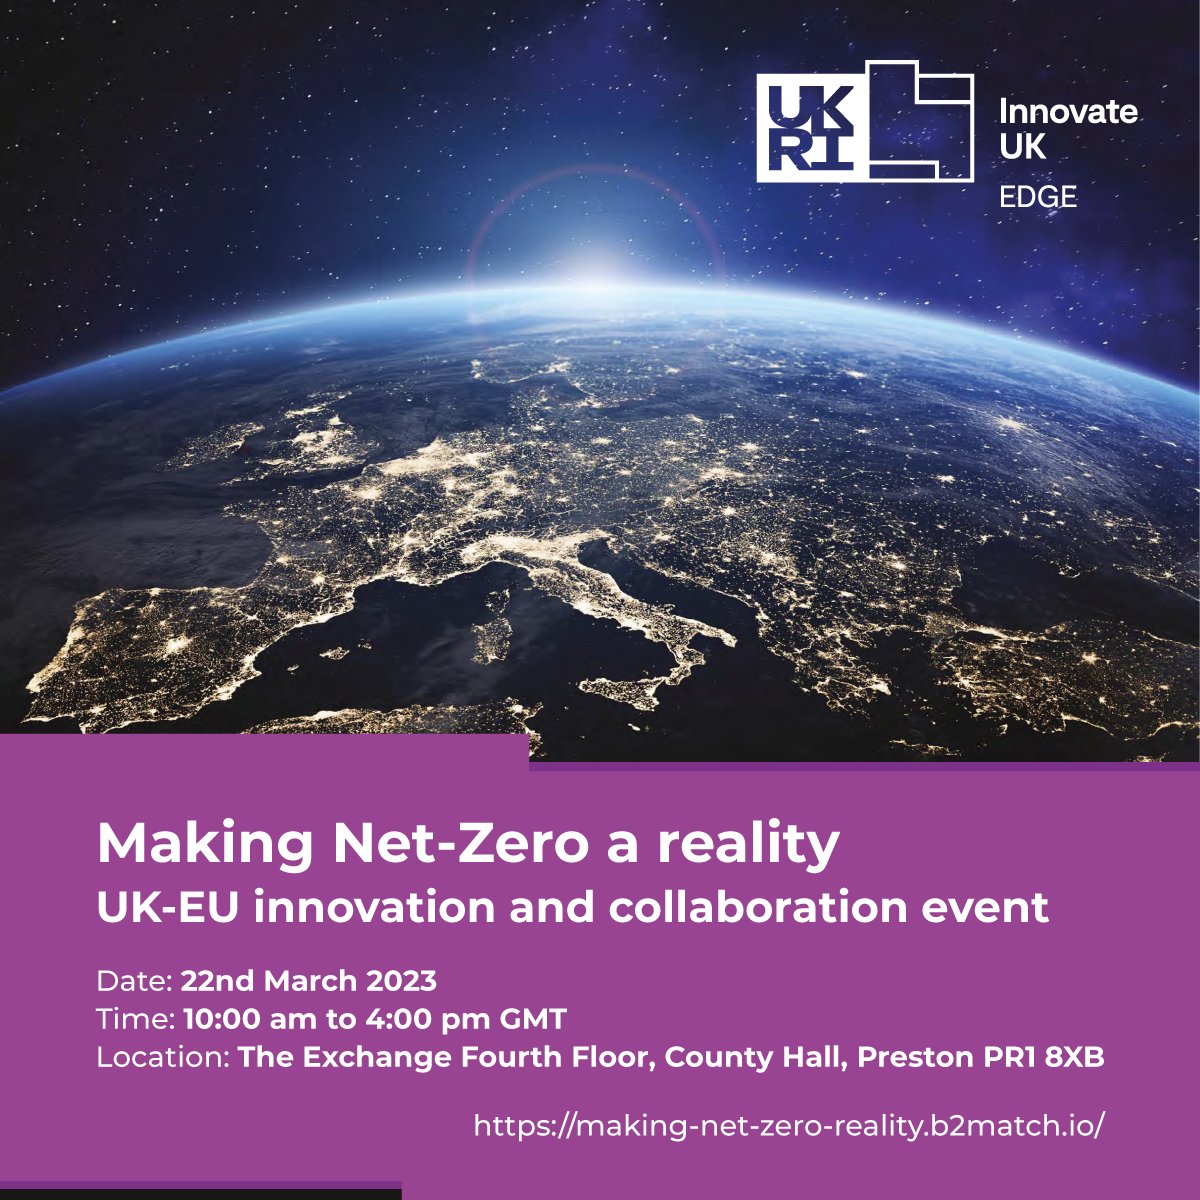 How do you reach Net Zero as an SME? On Wednesday we're with @Innovateuk talking how to make Net Zero a reality. #InnovateUKEDGE Register: making-net-zero-reality.b2match.io